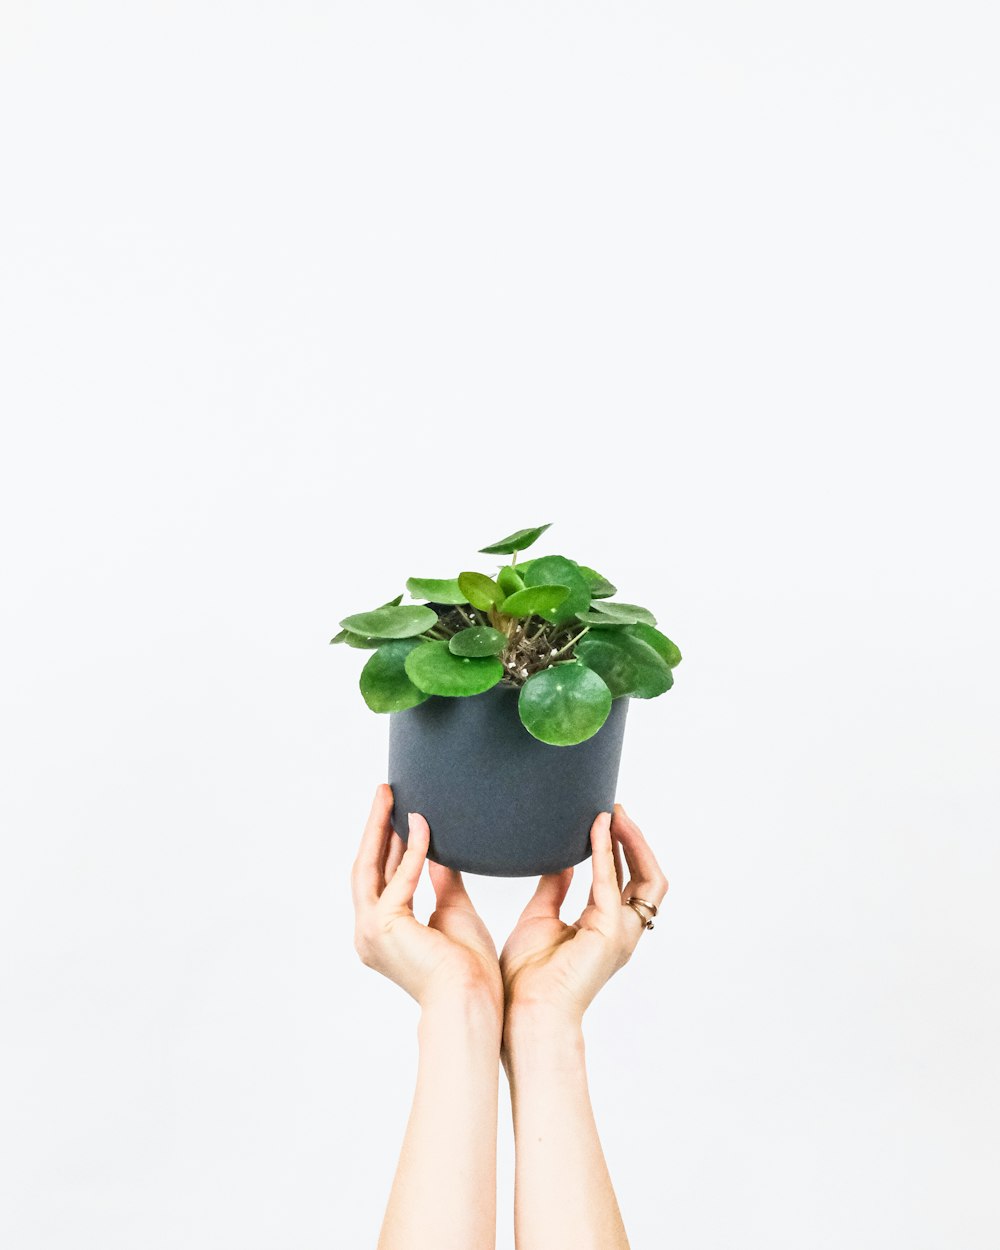 person holding green plant with green leaves